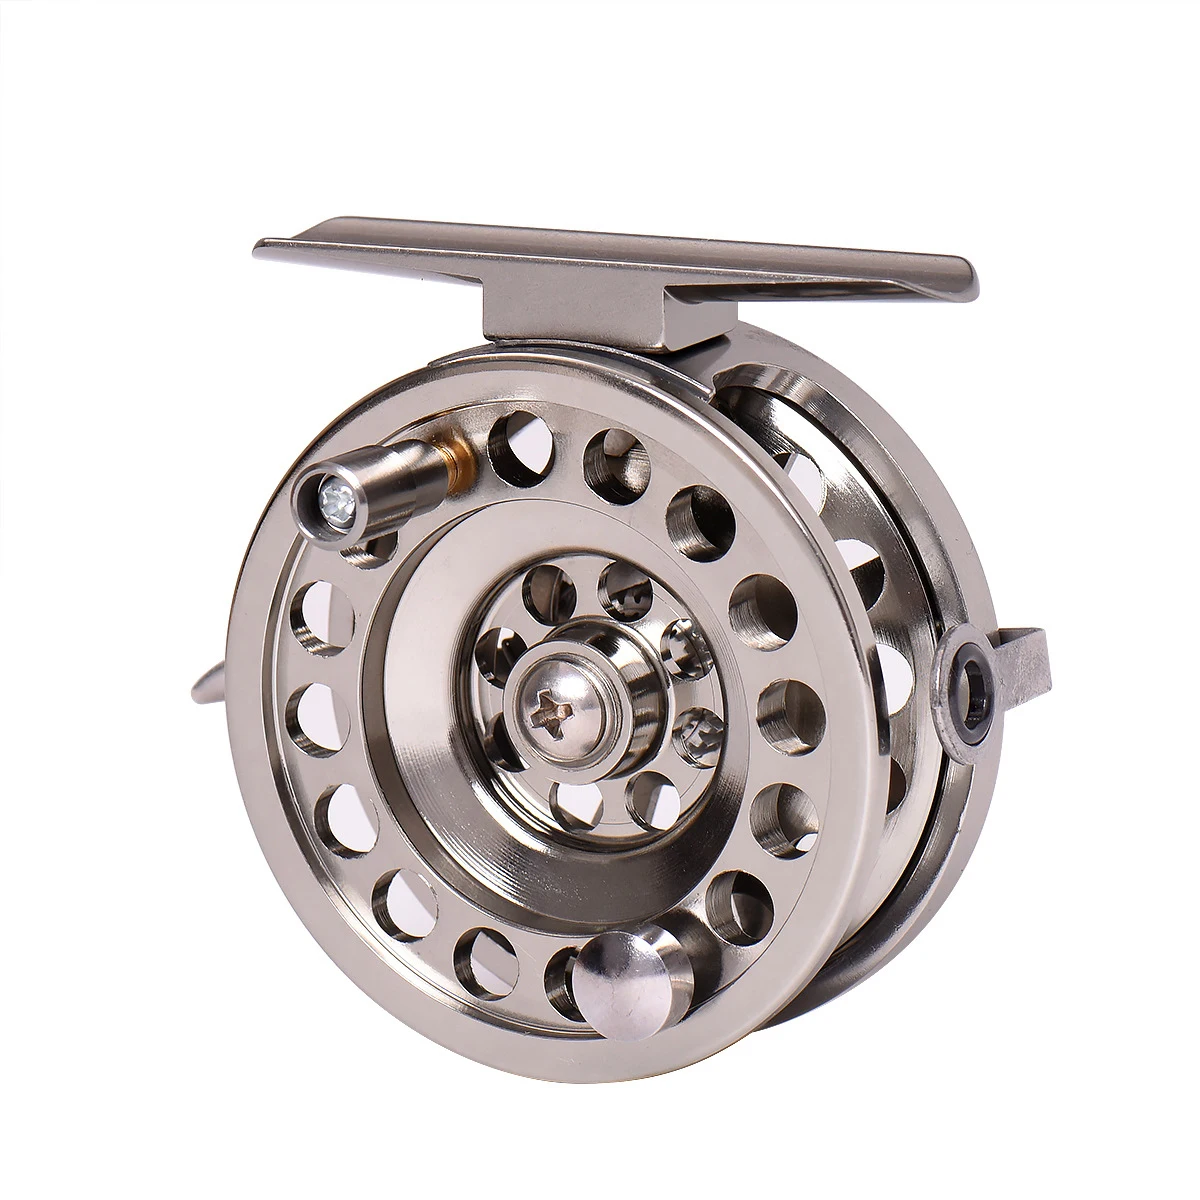 Aluminum Alloy Fly Fishing Reel Right Handed Smooth Rock Ice Fishing Reels BLD 